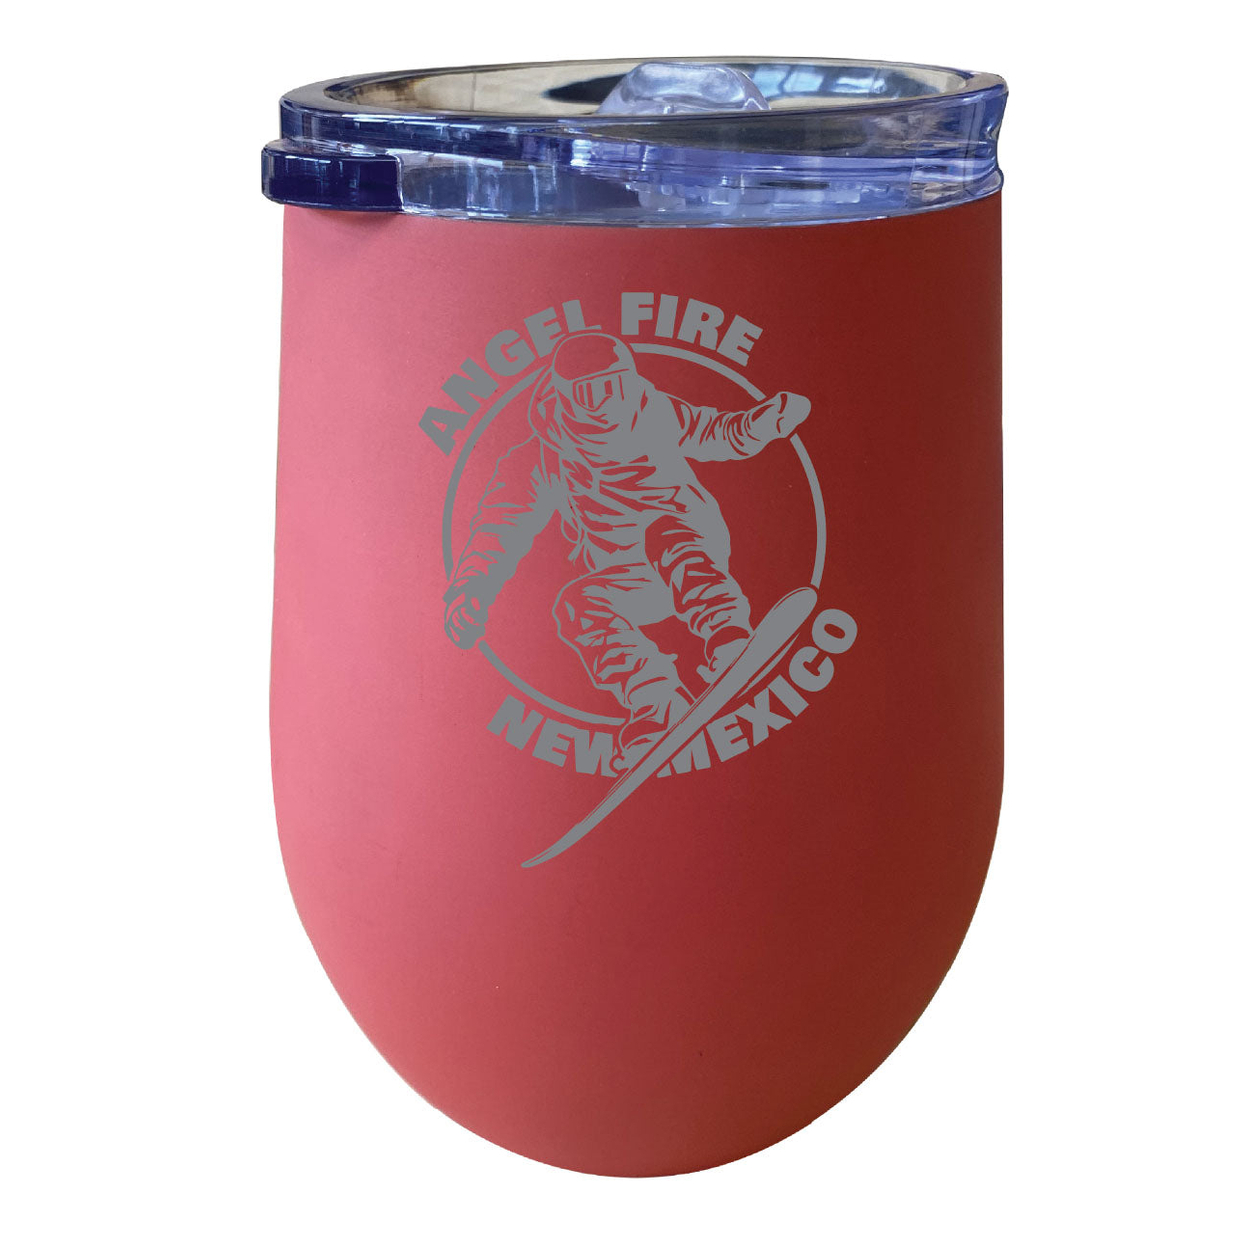 Angel Fire New Mexico Souvenir 12 Oz Engraved Insulated Wine Stainless Steel Tumbler - Coral,,Single Unit